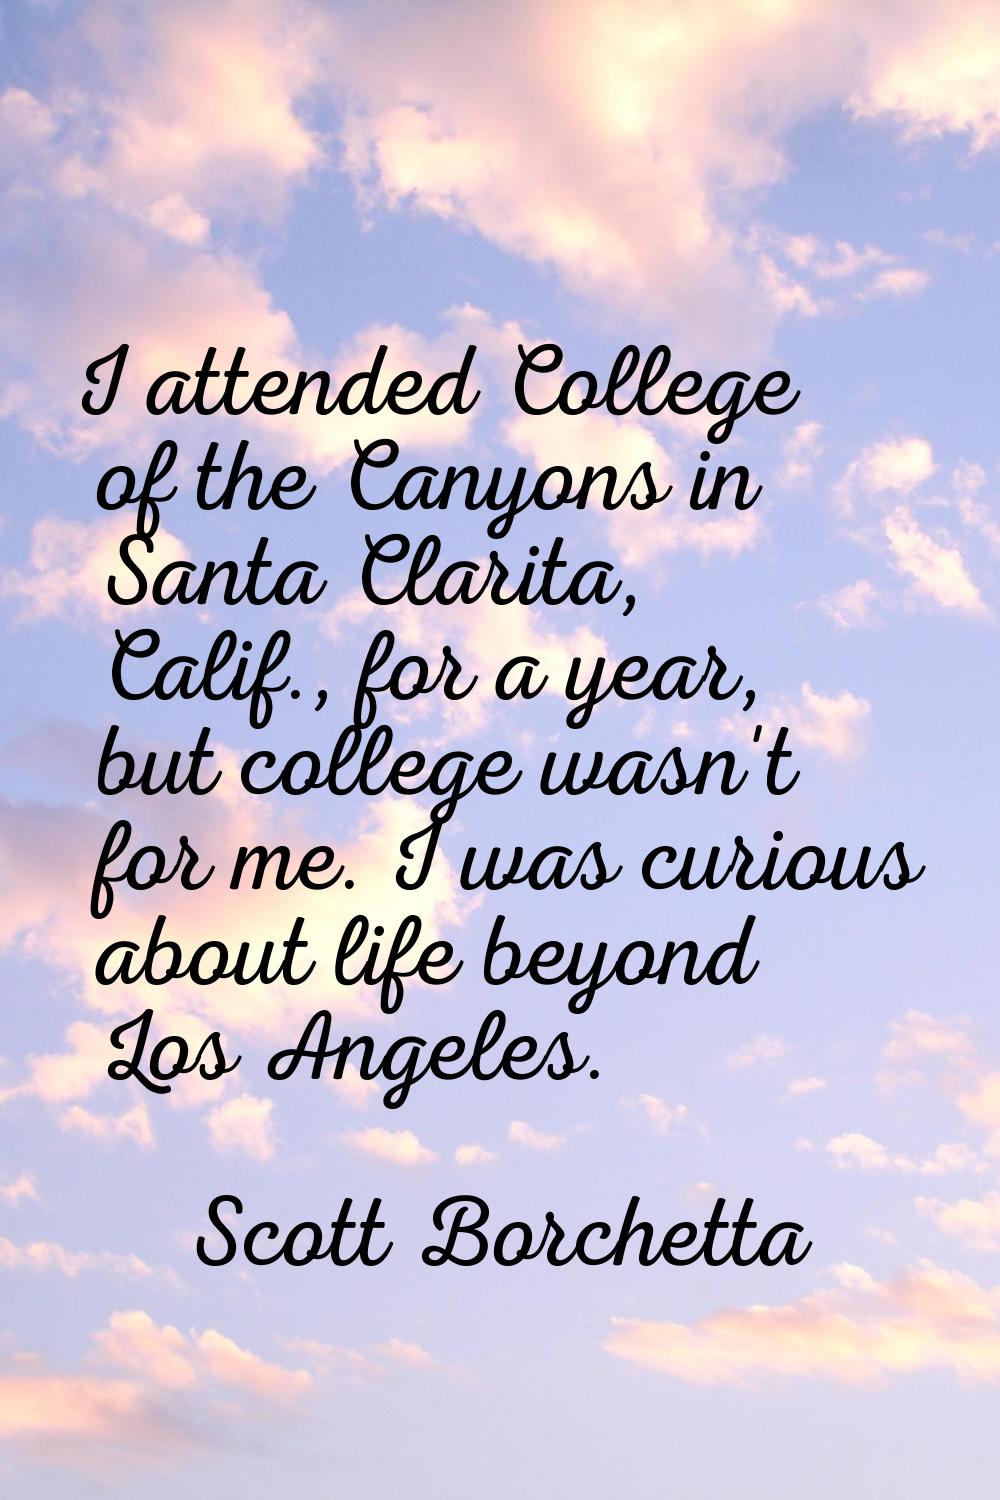 I attended College of the Canyons in Santa Clarita, Calif., for a year, but college wasn't for me. 